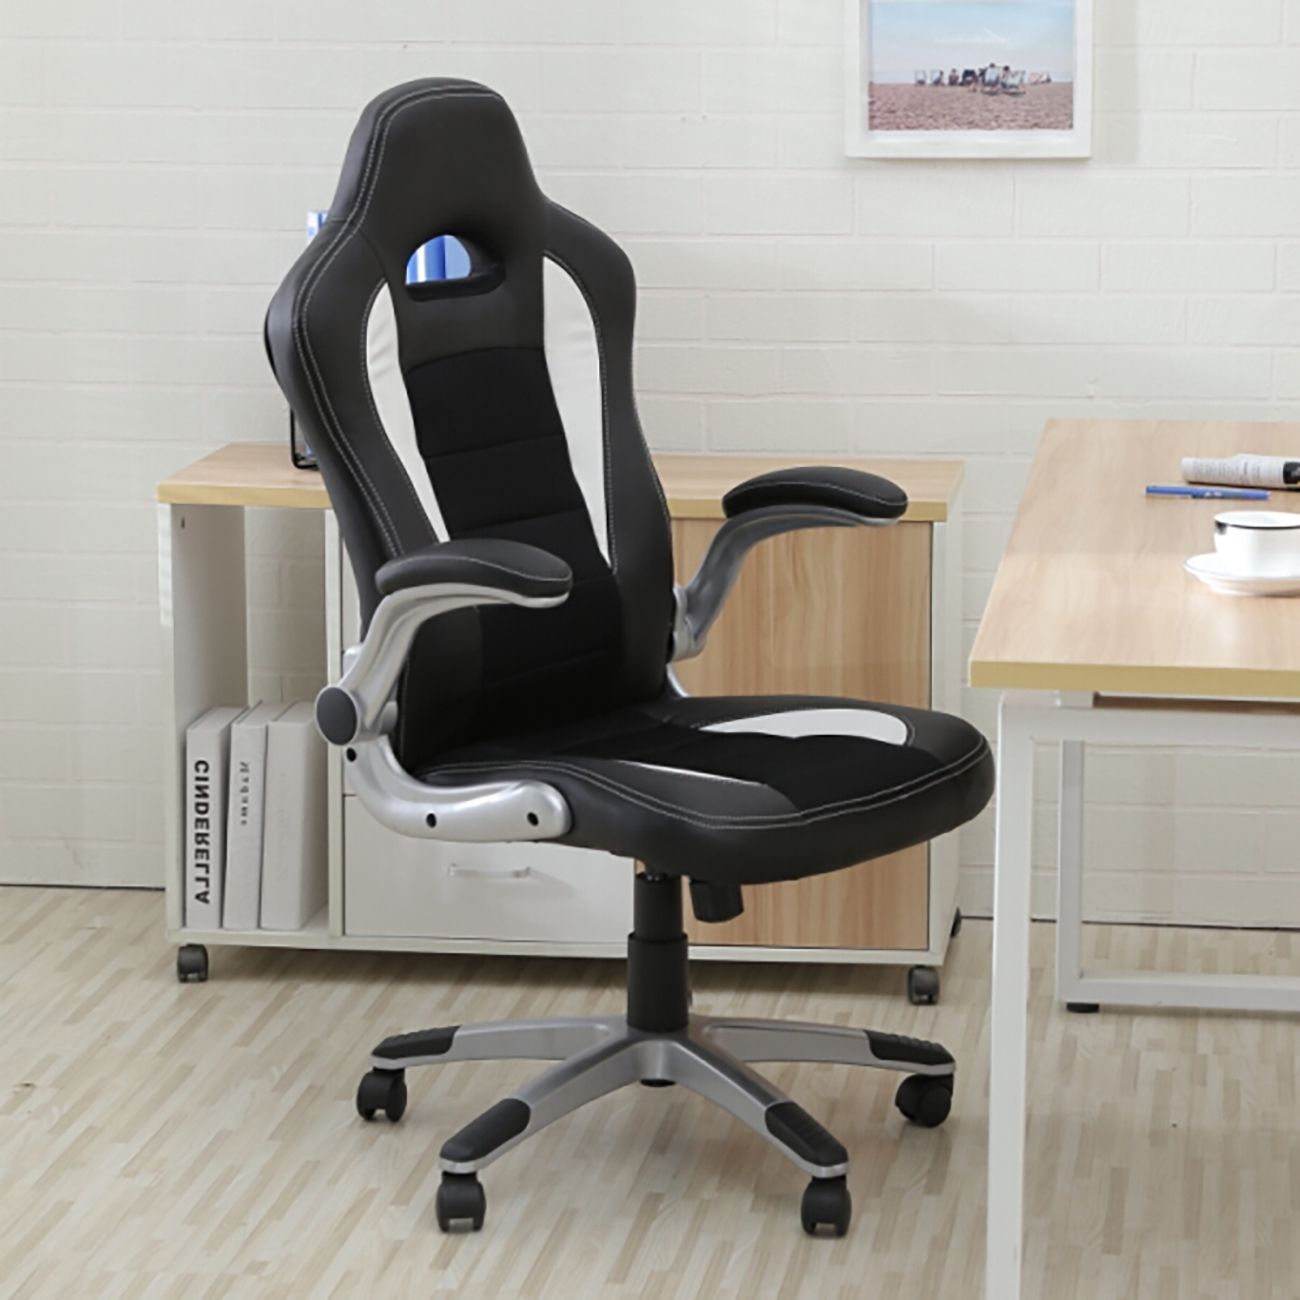 2018 Office Chair Ergonomic Computer Pu Leather Desk Race Car Bucket Pertaining To Executive Office Chairs With Flip Up Arms (View 16 of 20)